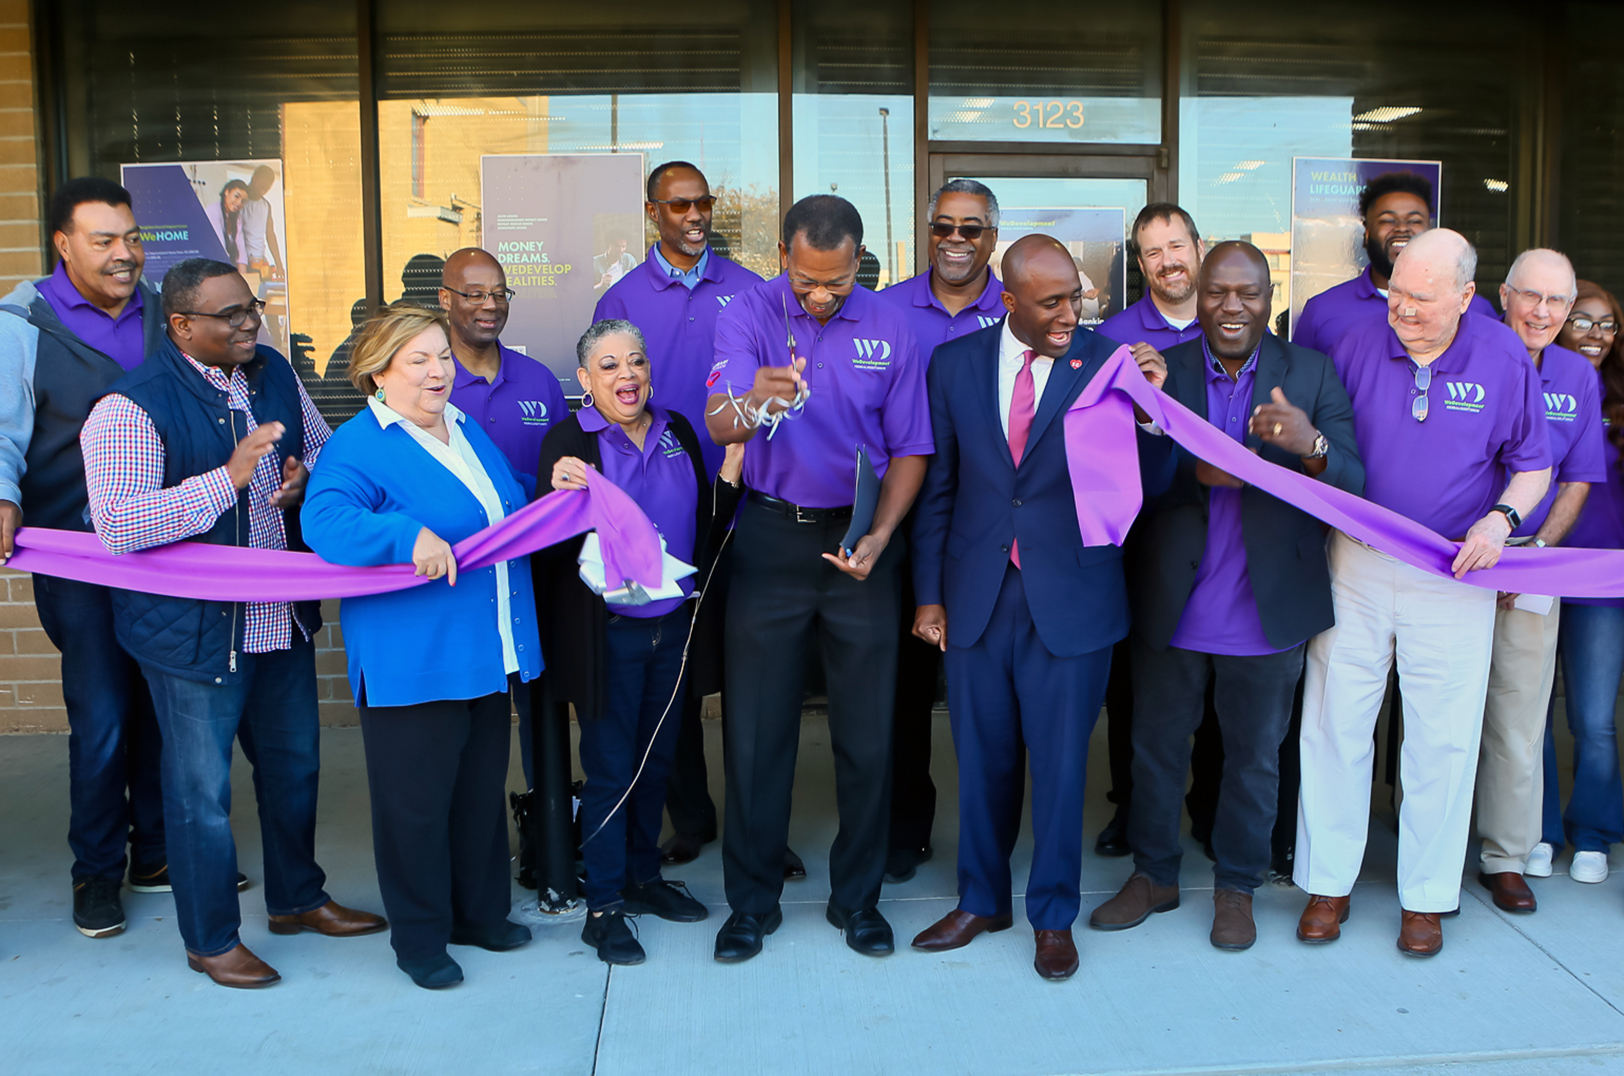 A new credit union on Prospect aims to be the pebble that causes a ripple effect east of Troost